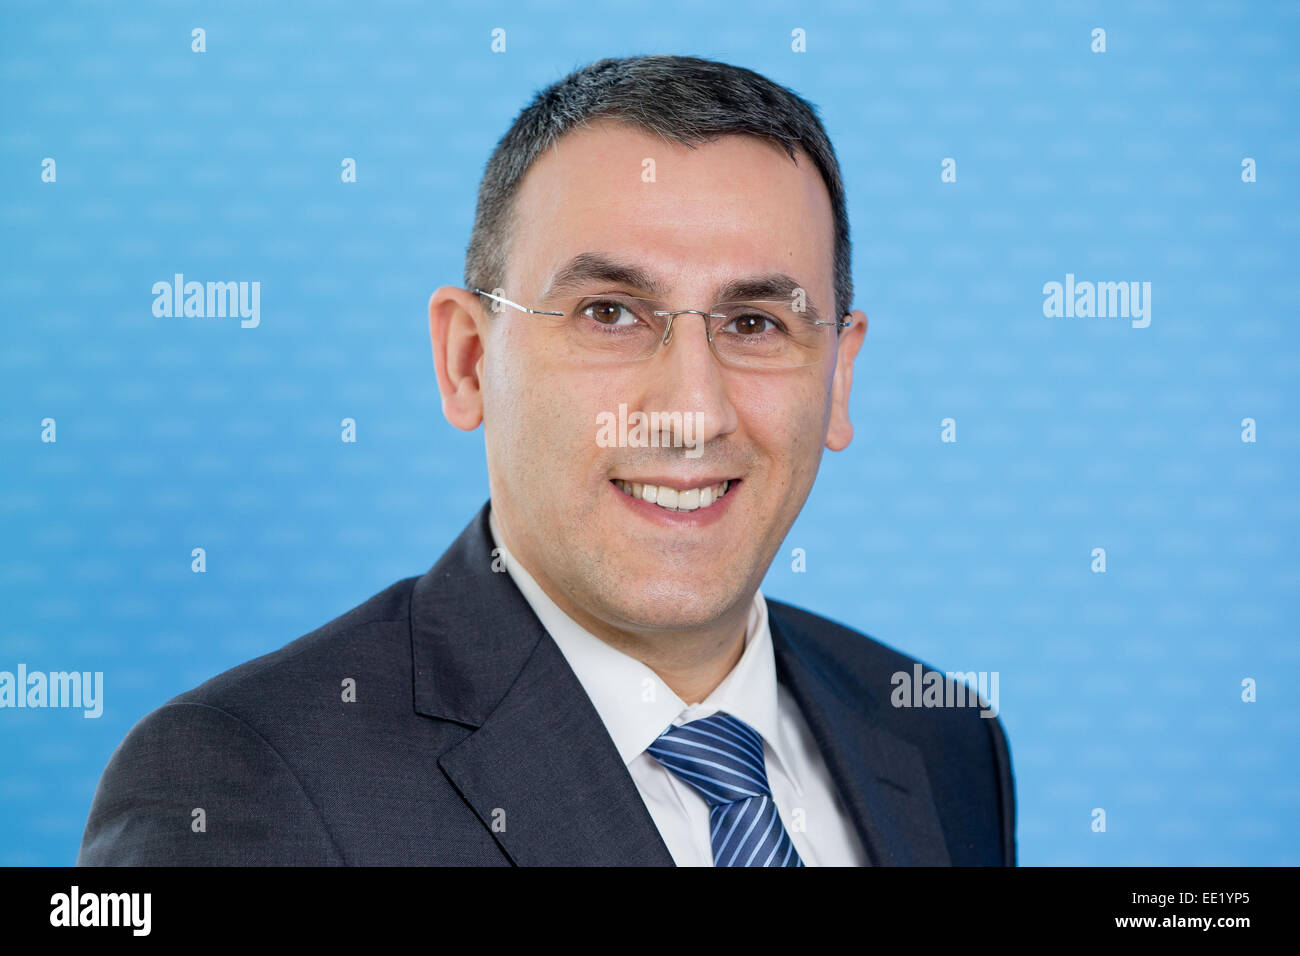 The manager of electronics company Grundig, Murat Sahin, photographed at the sidelines of a press conference on the company's strategic direction for 2015 in Nuremberg, Germany, 13 January 2015. PHOTO: DANIEL KARMANN/dpa Stock Photo